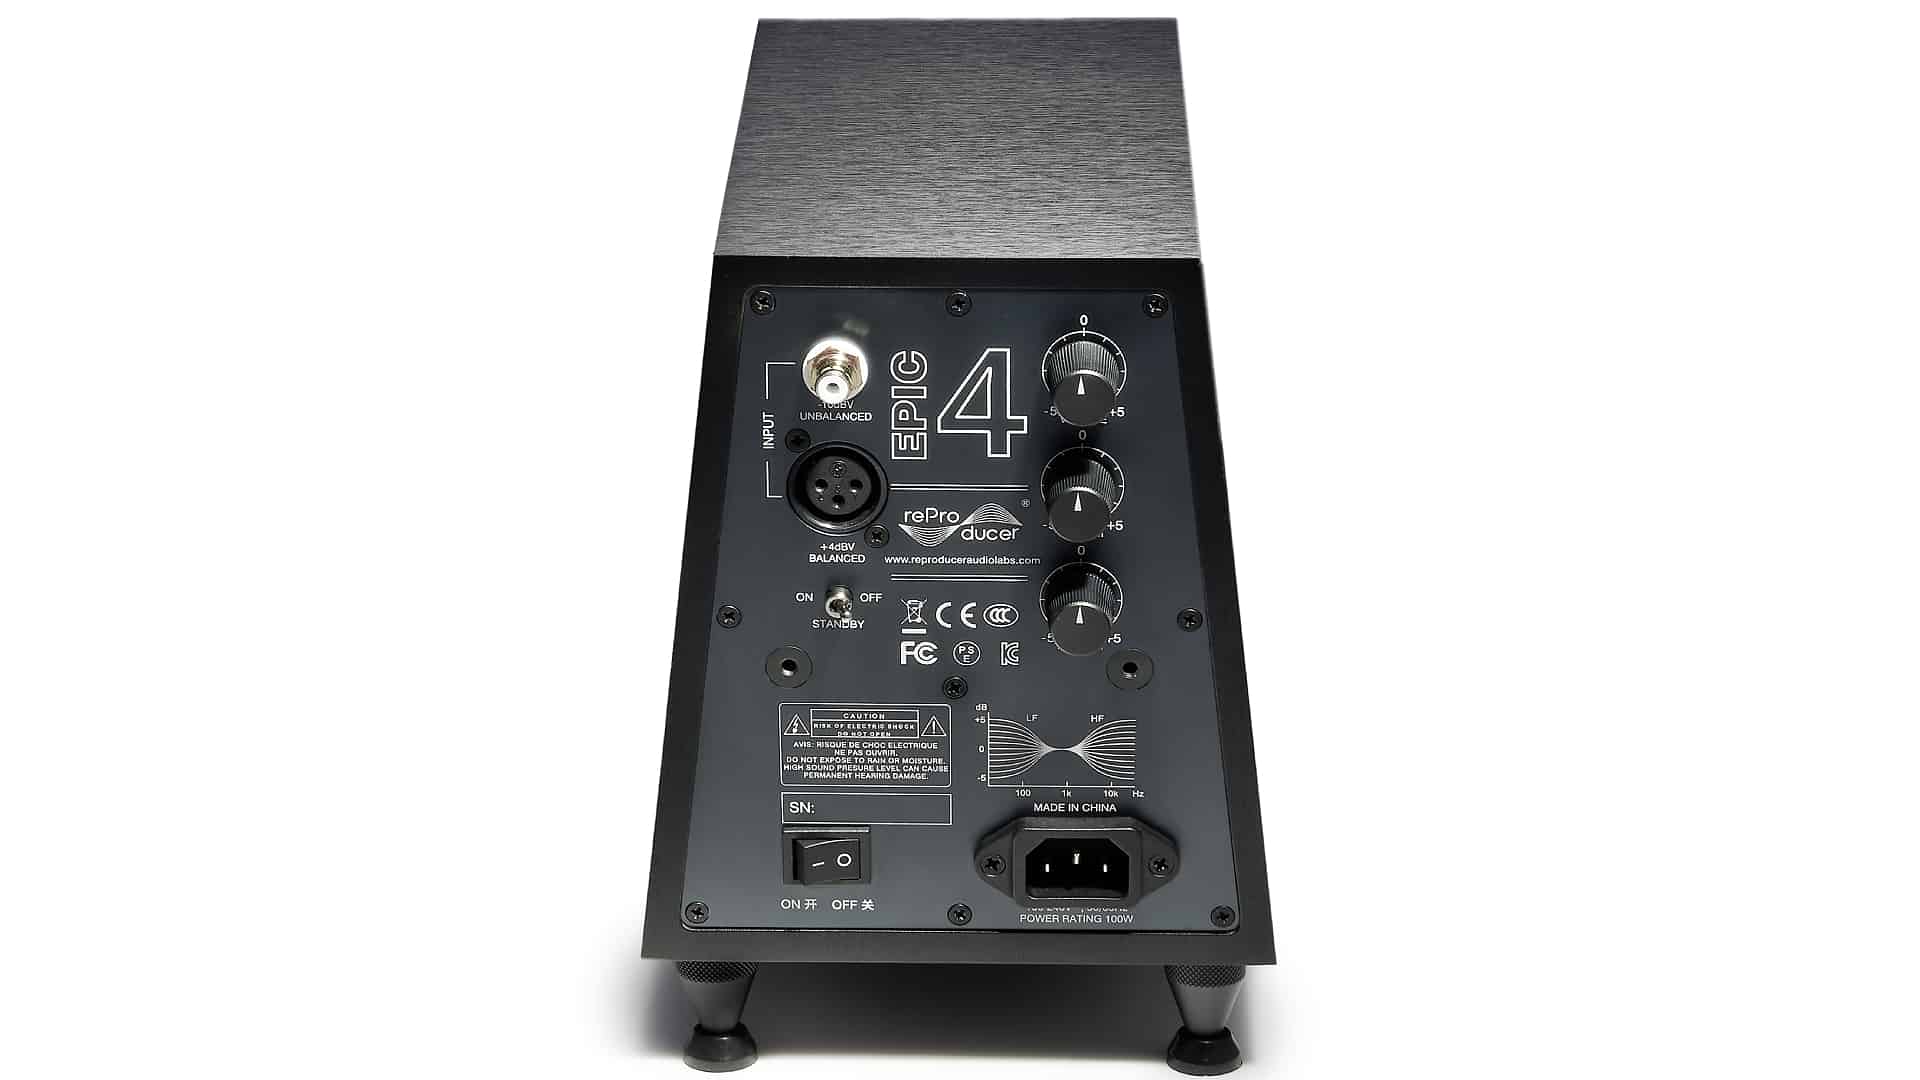 reProducer Audio Labs Epic 4